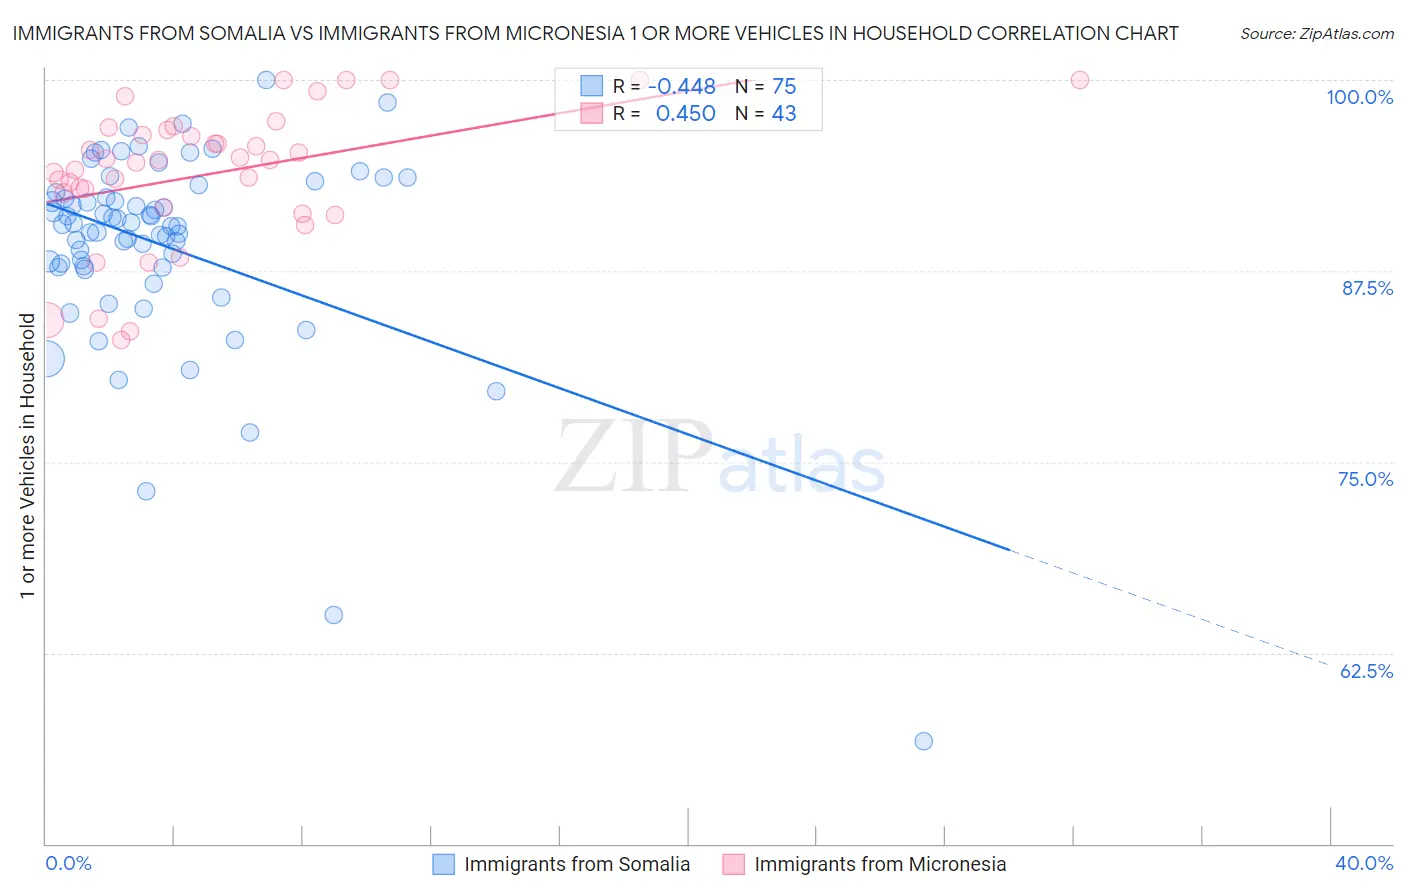 Immigrants from Somalia vs Immigrants from Micronesia 1 or more Vehicles in Household